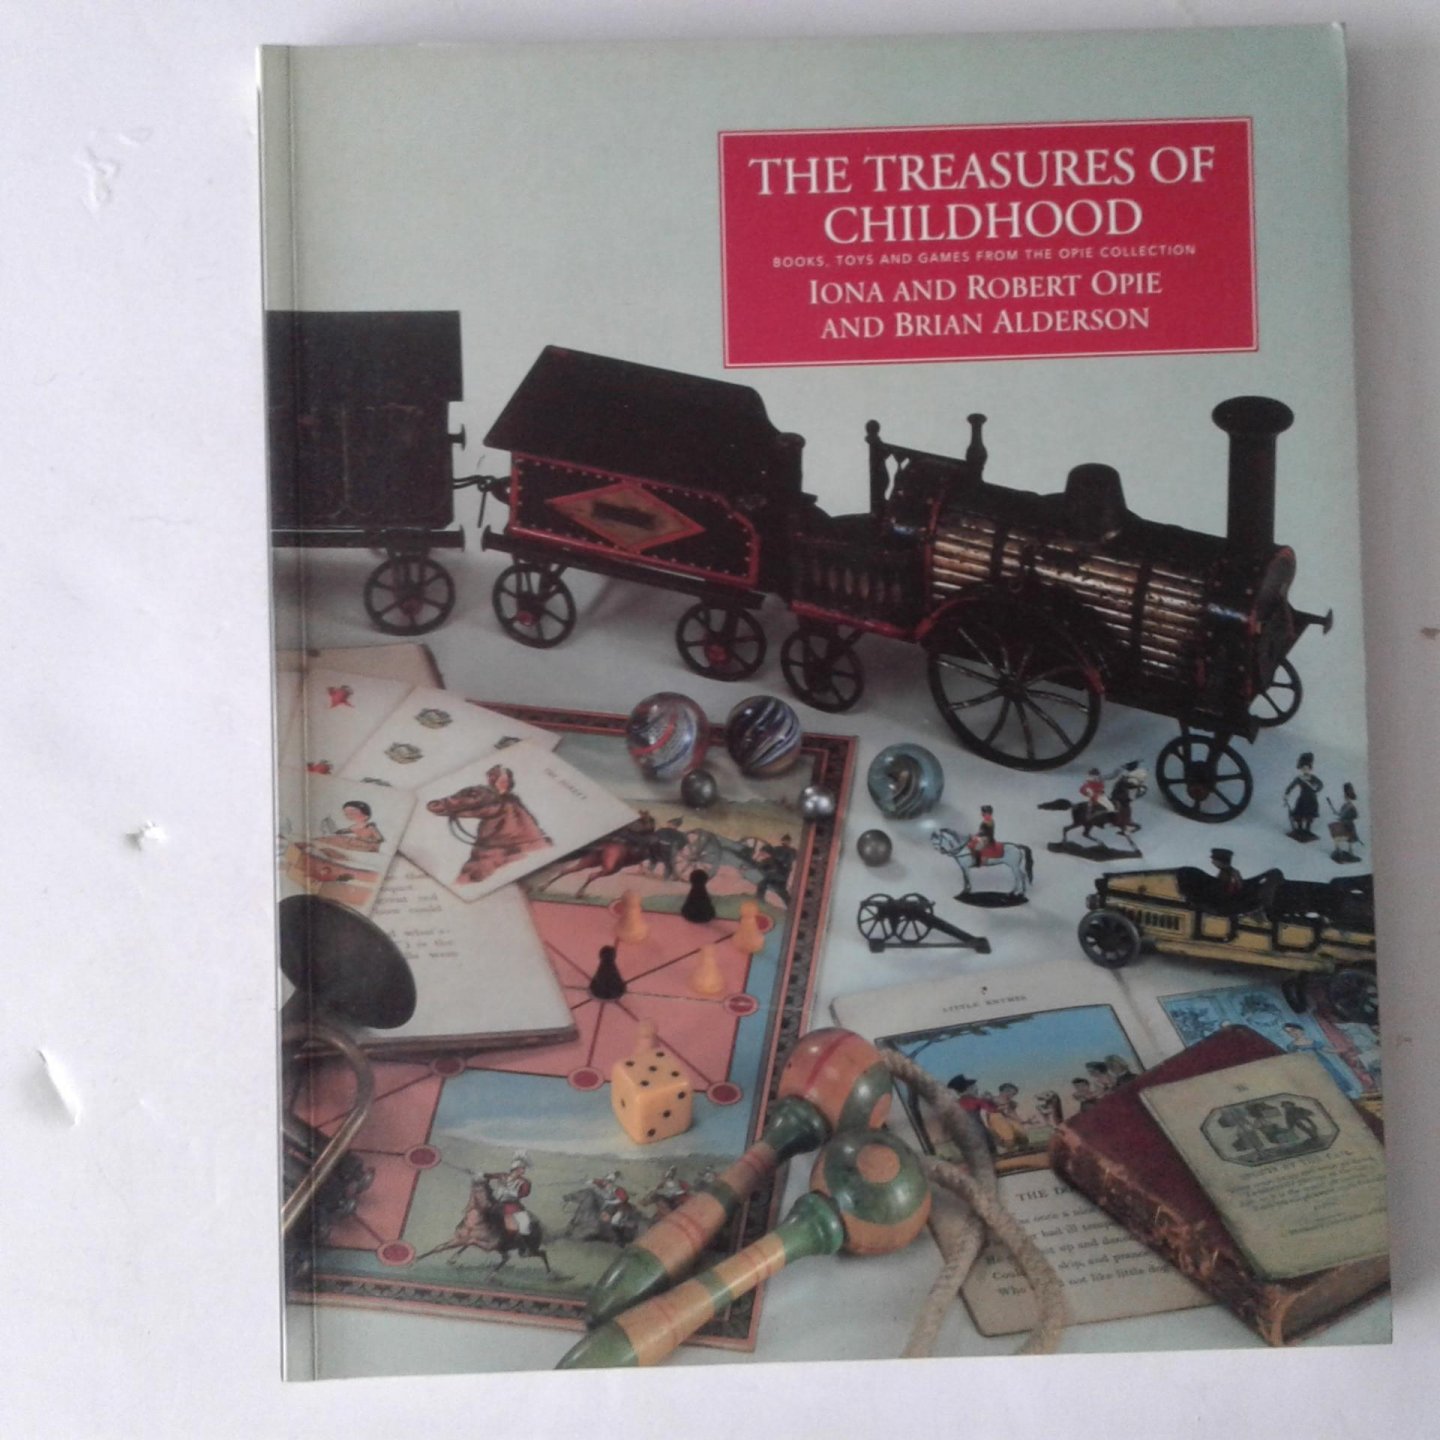 Opie, Robert ; Opie, Iona ; Alderson, Brian - The Treasures of Childhood ; Books, toys, and games from the Opie Collection